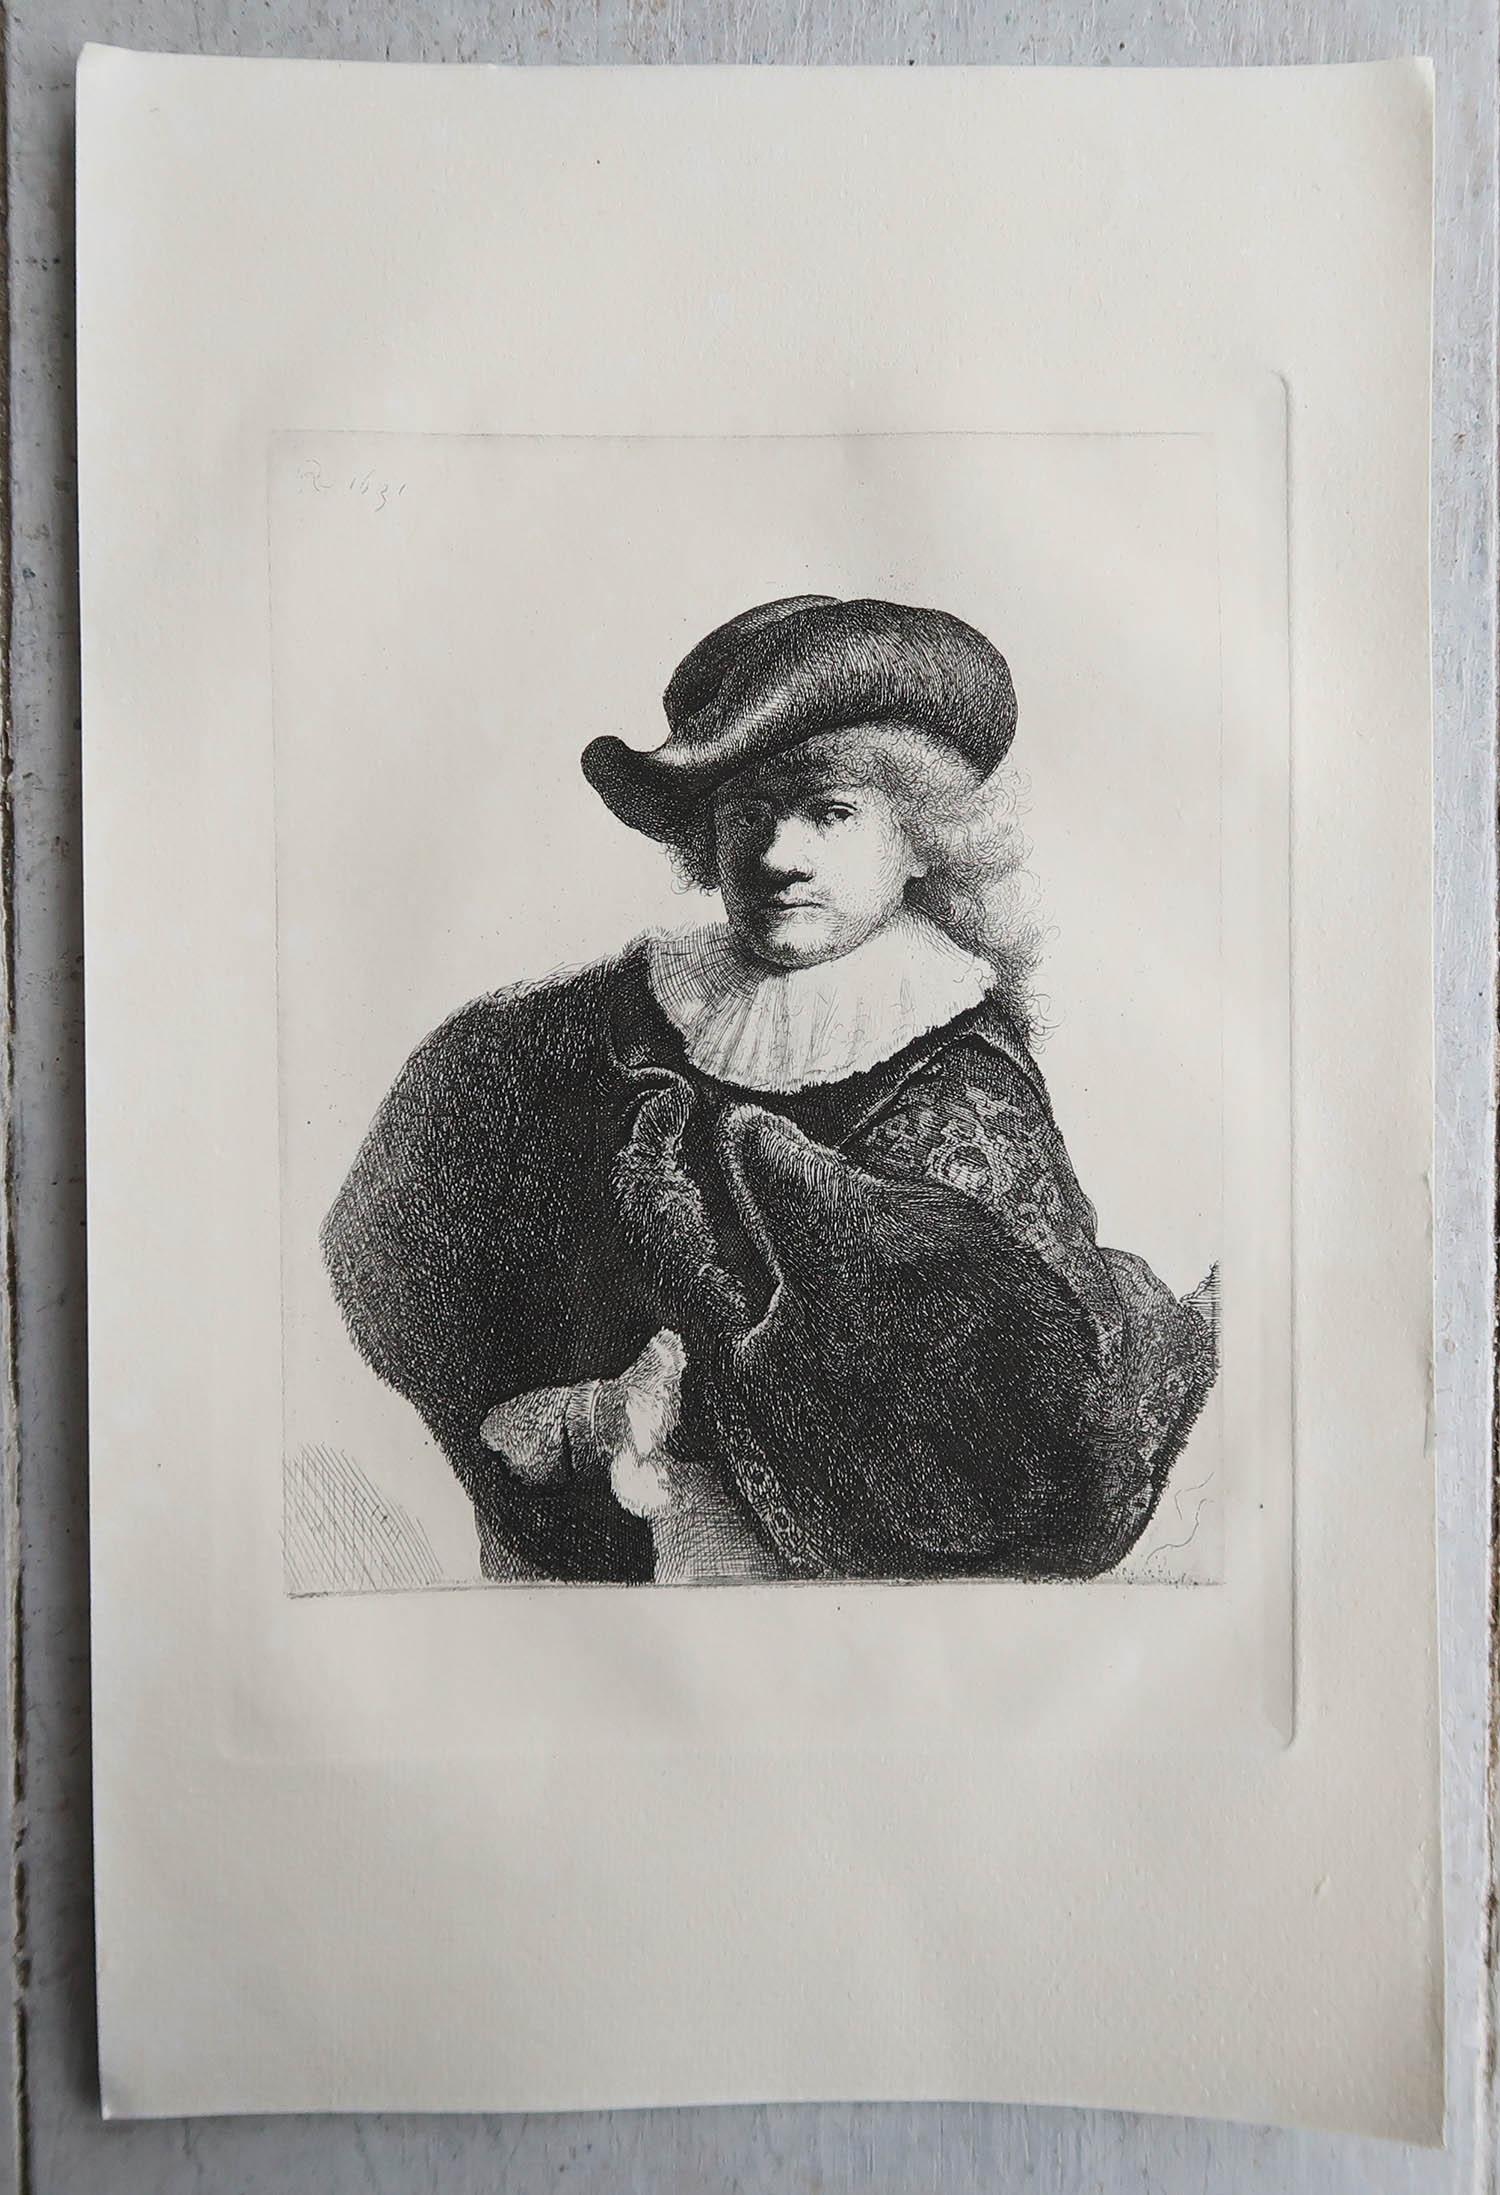 English Original Antique Etching By A.Durand After Rembrandt. C.1900